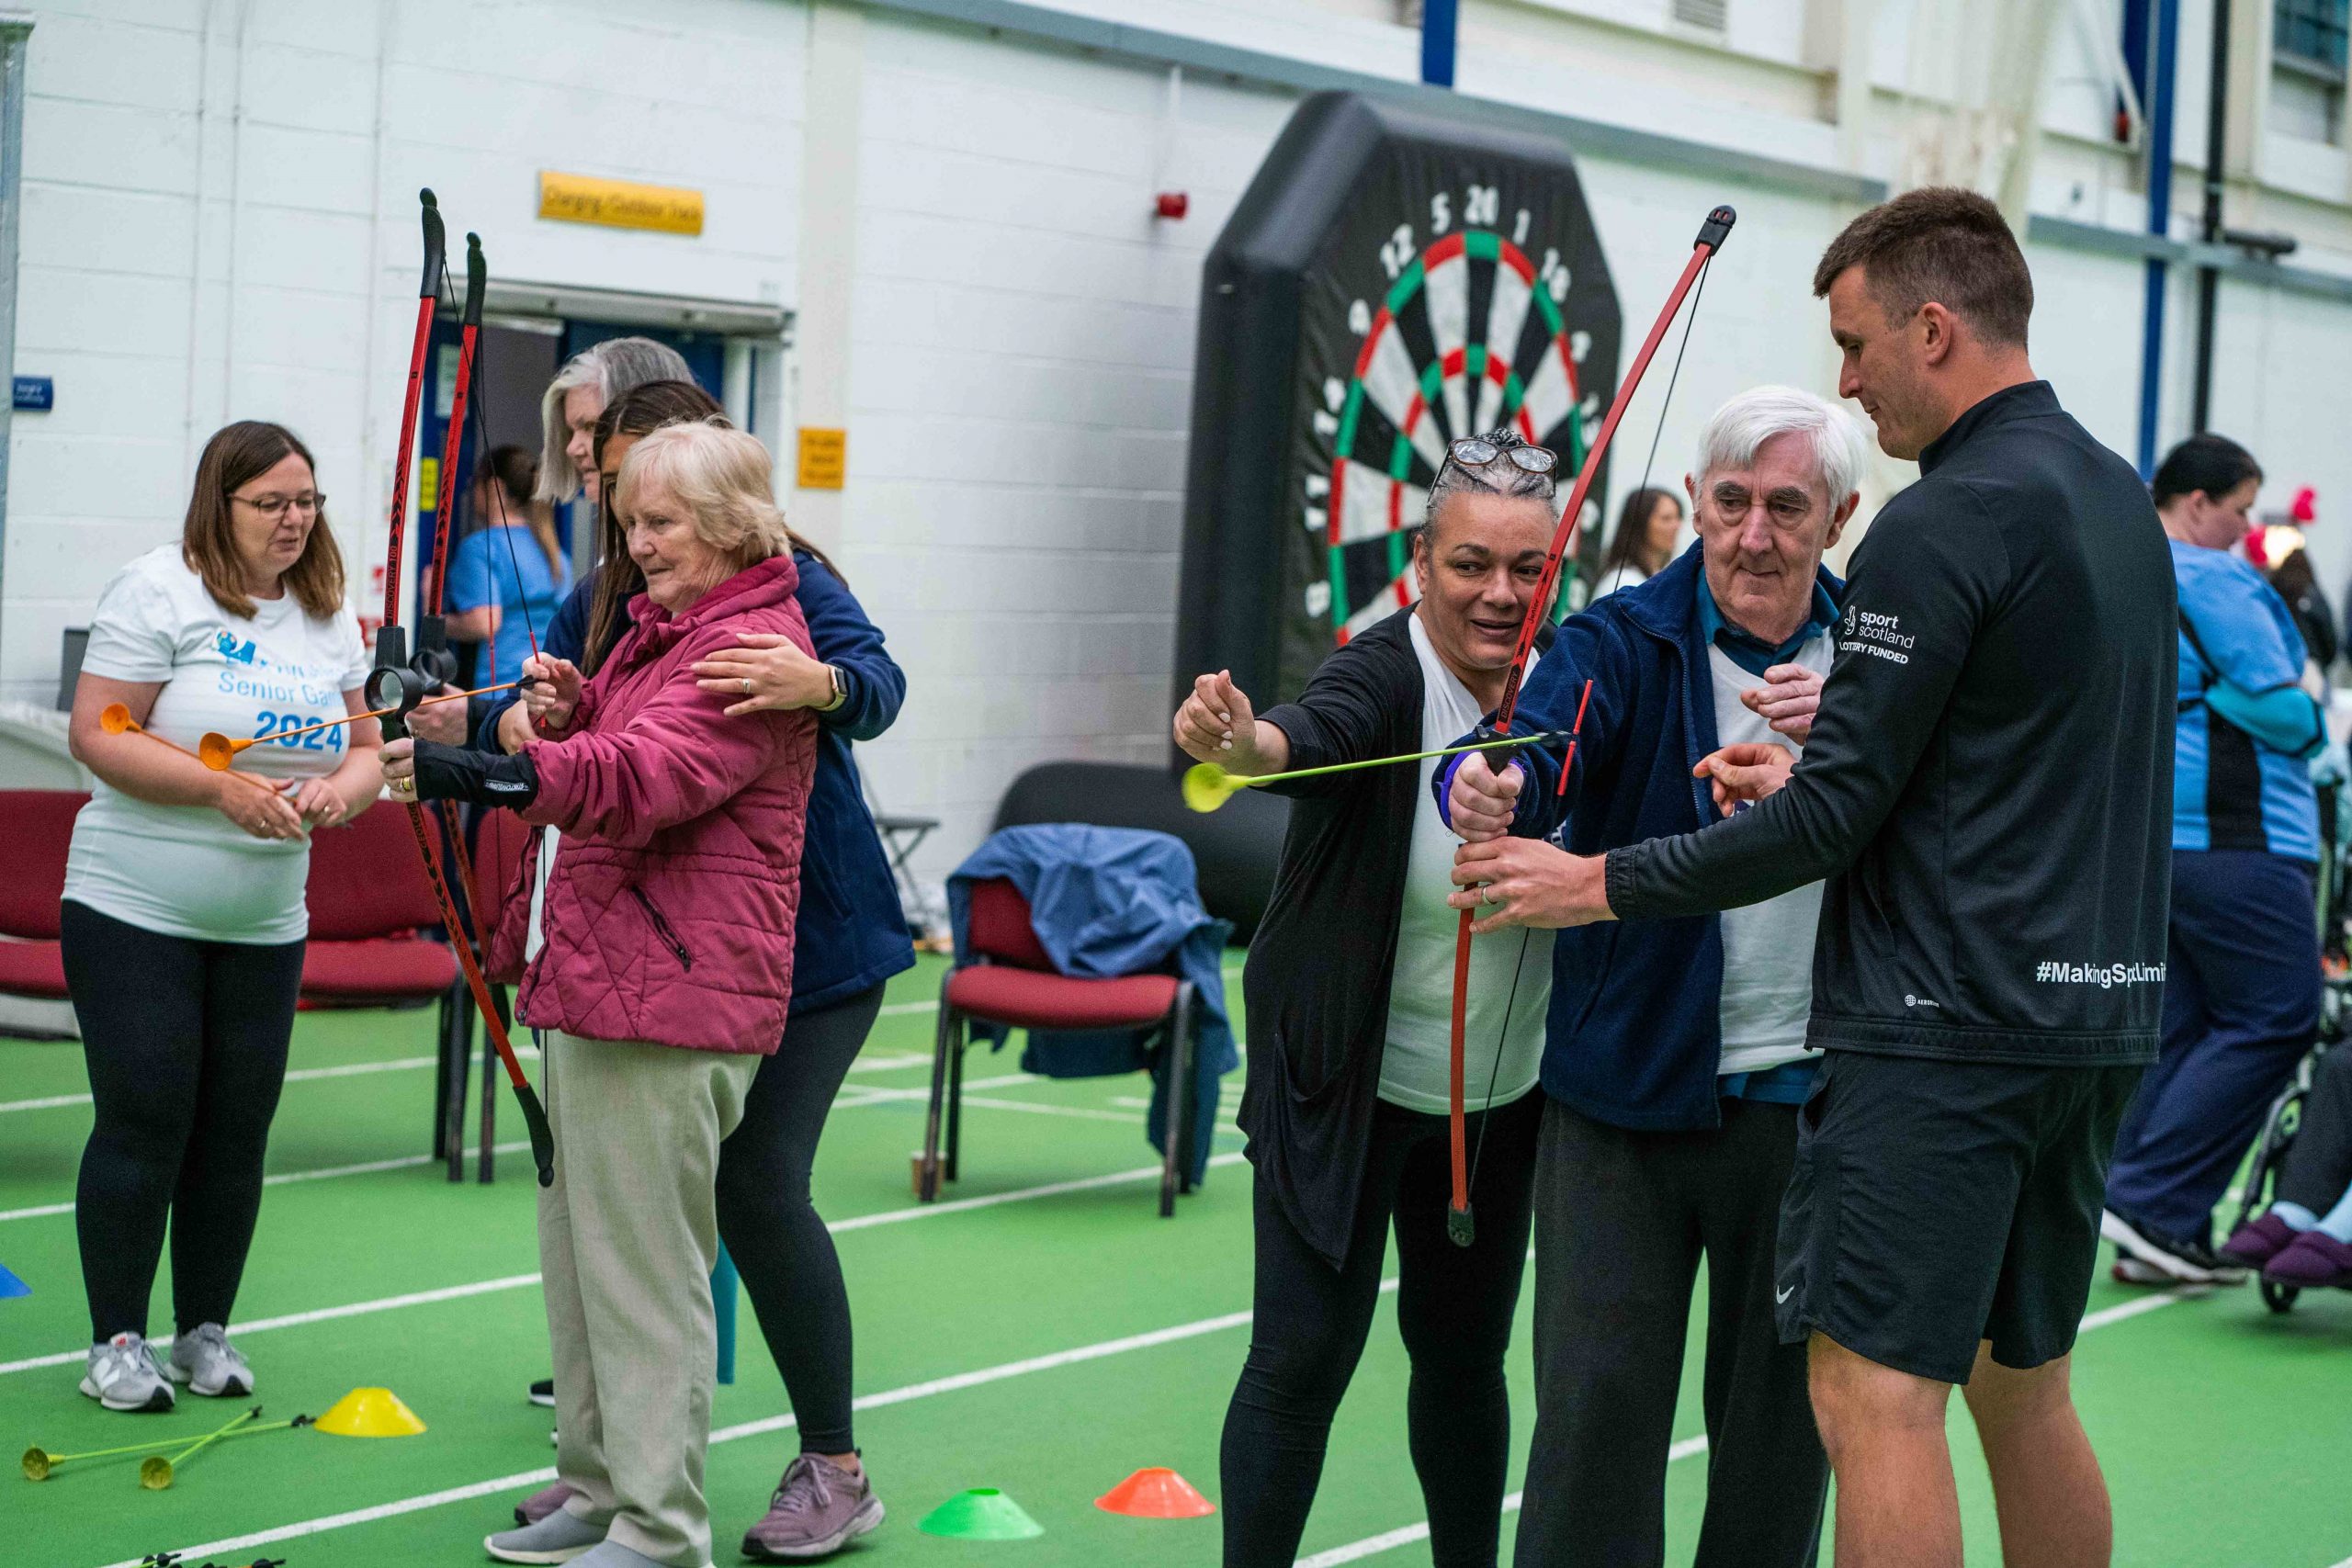 Attendees enjoying some archery at the recent Senior Games